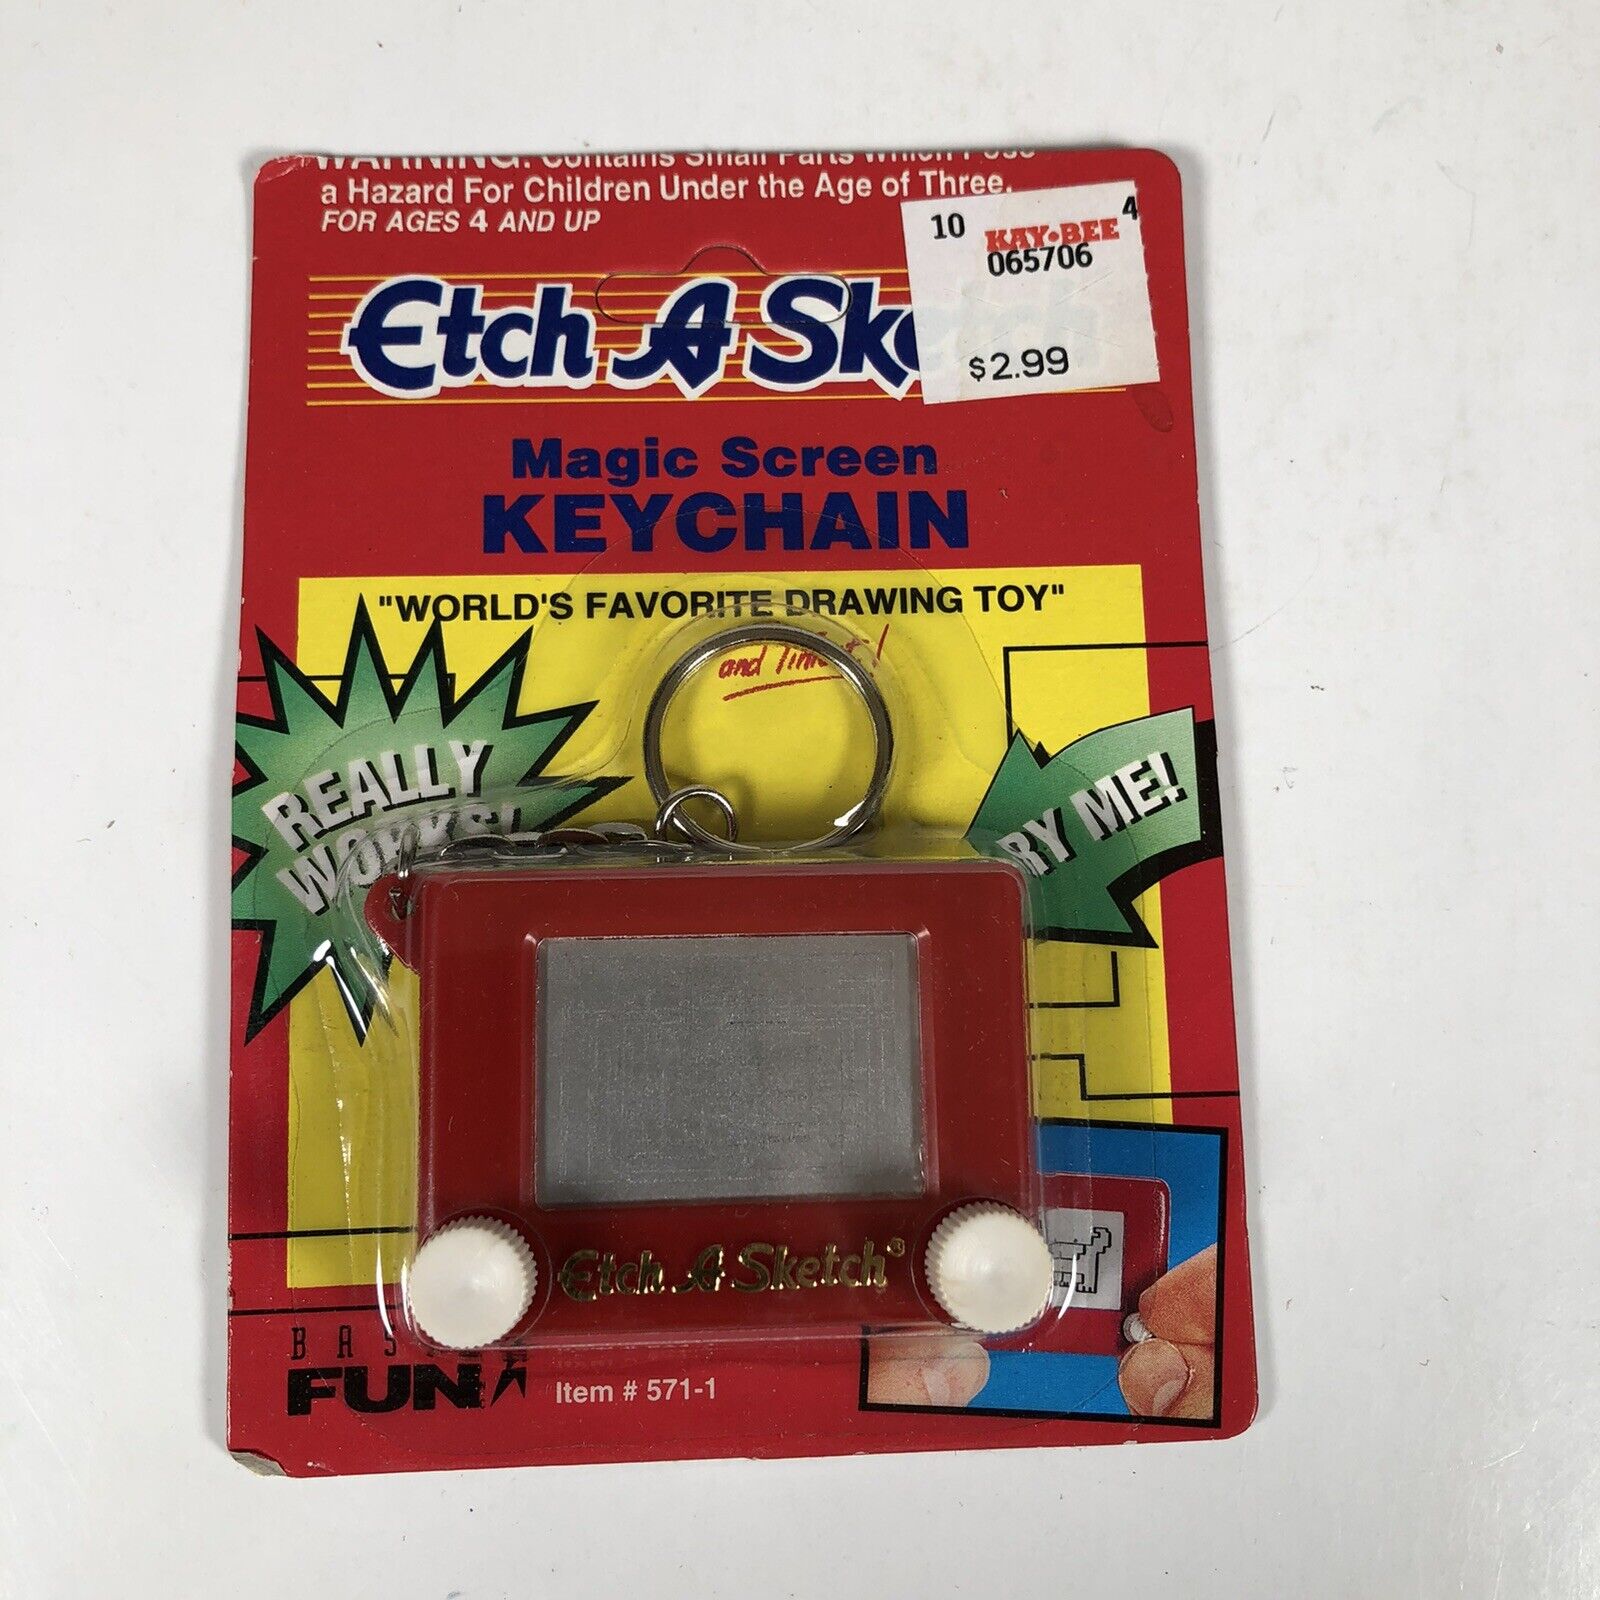 Etch-A-Sketch Magic Screen Drawing Toy Keychain (SEALED)